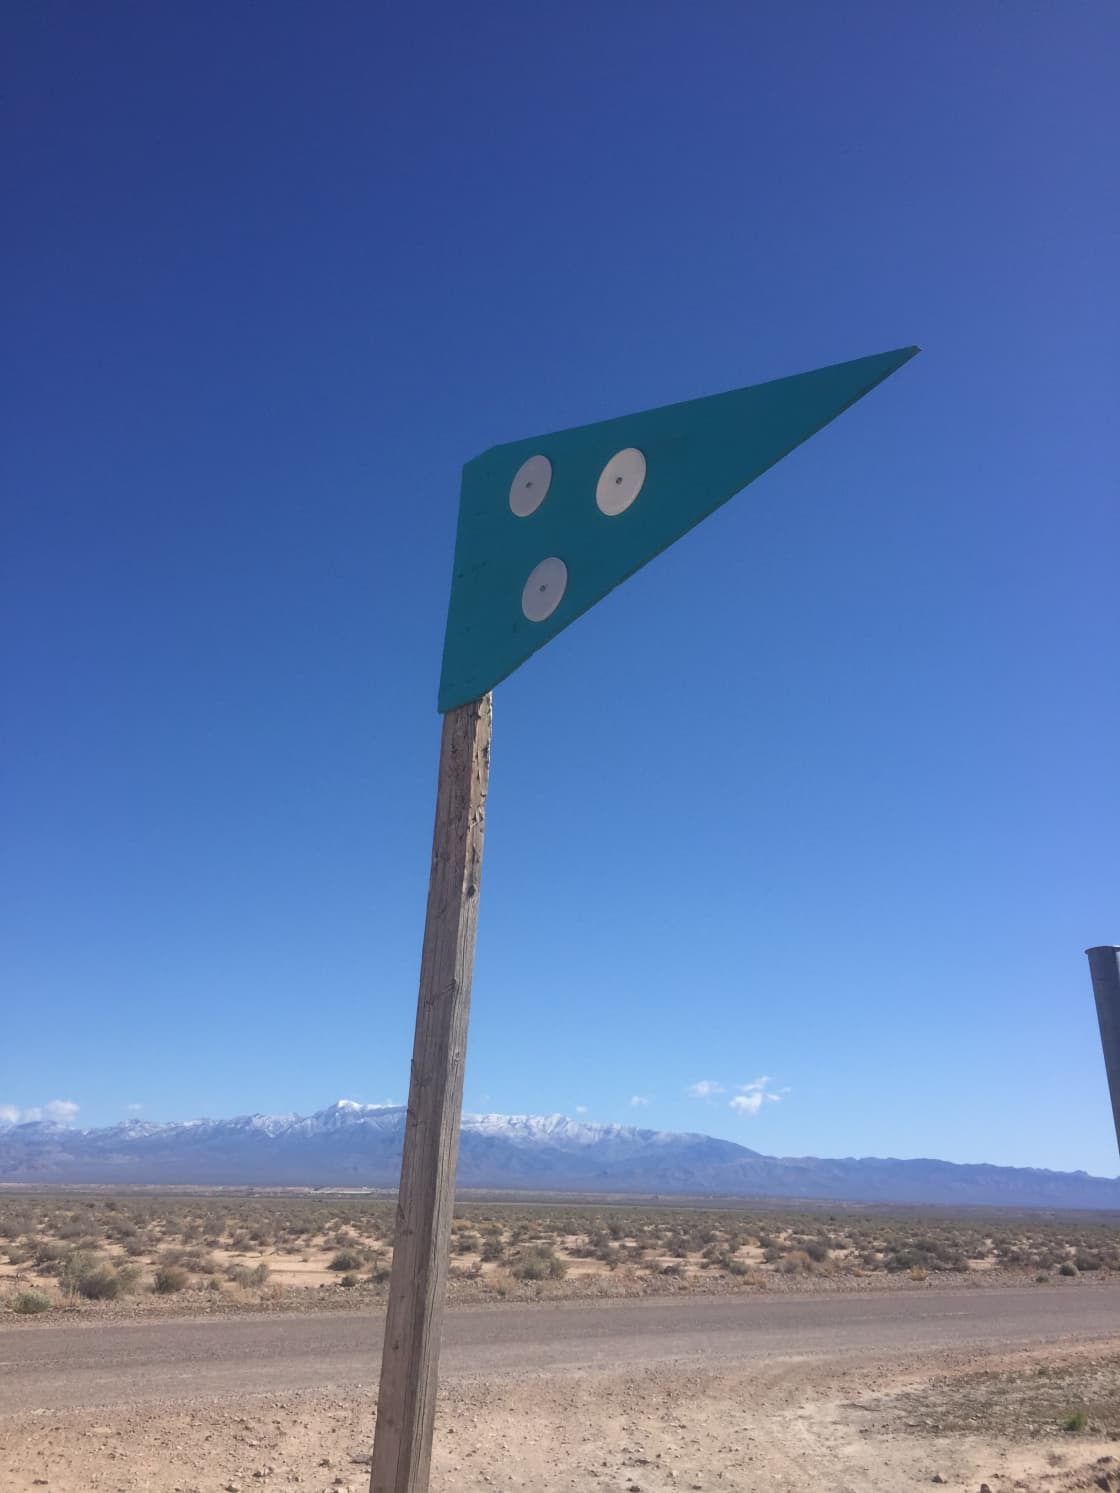 Watch for the 3moons flag on the Old Spanish Trail highway, 1 mile down from the campsite